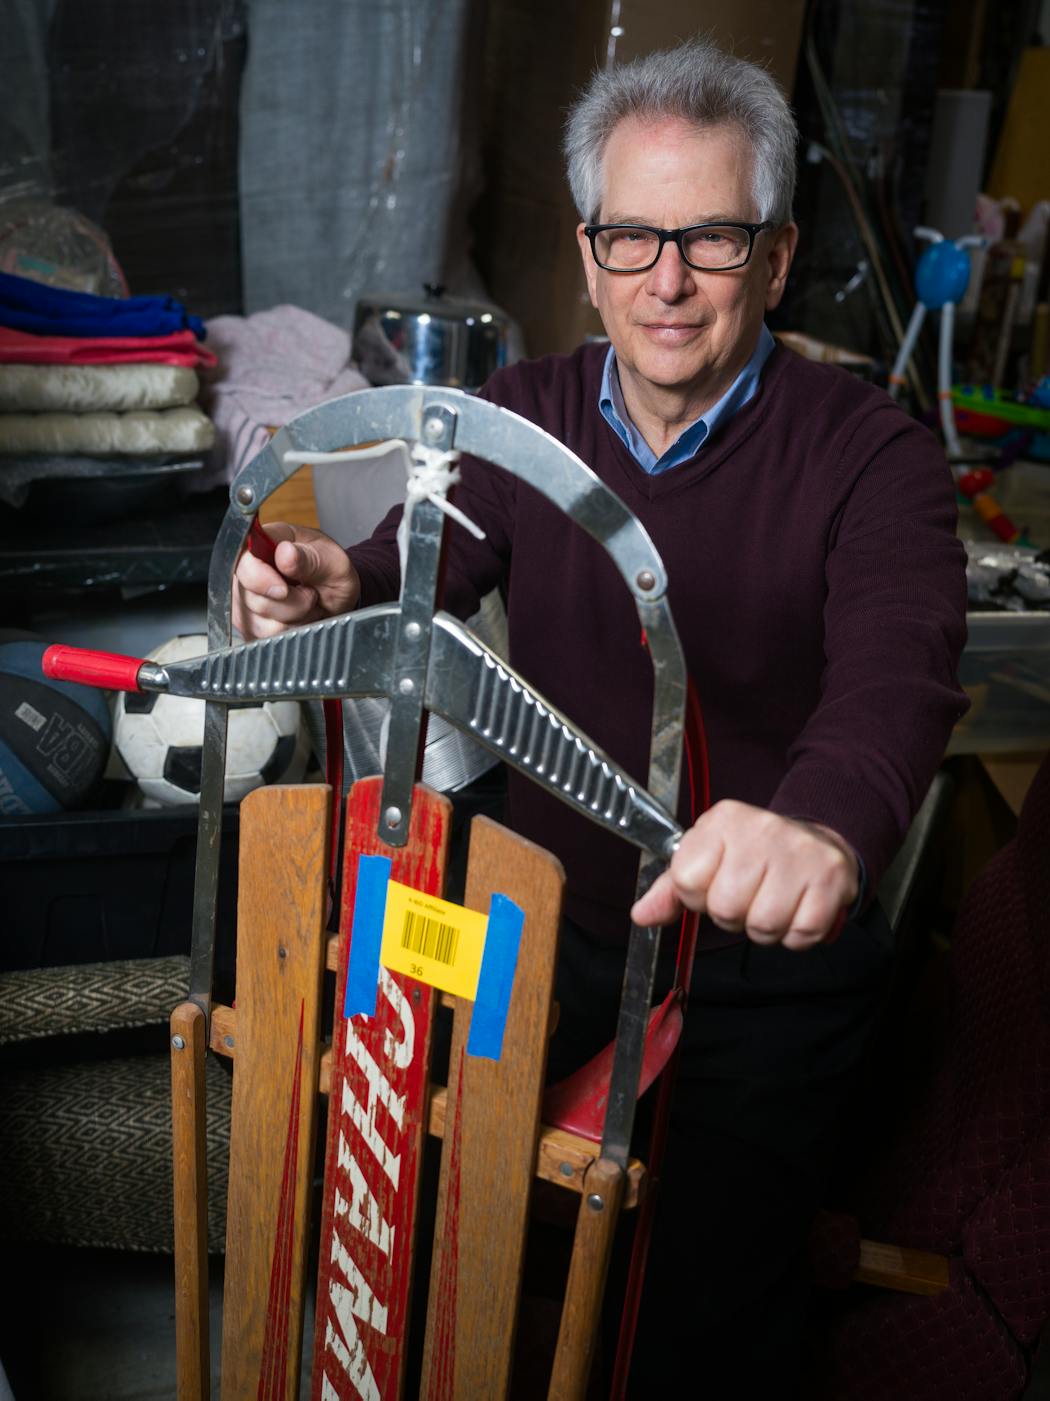 Joel Ackerman, a former UnitedHealth Group executive and startup founder, holds an item donated to Eden Prairie-based RedLadder, an online marketplace for people to trade items that result in a donation to a charity.